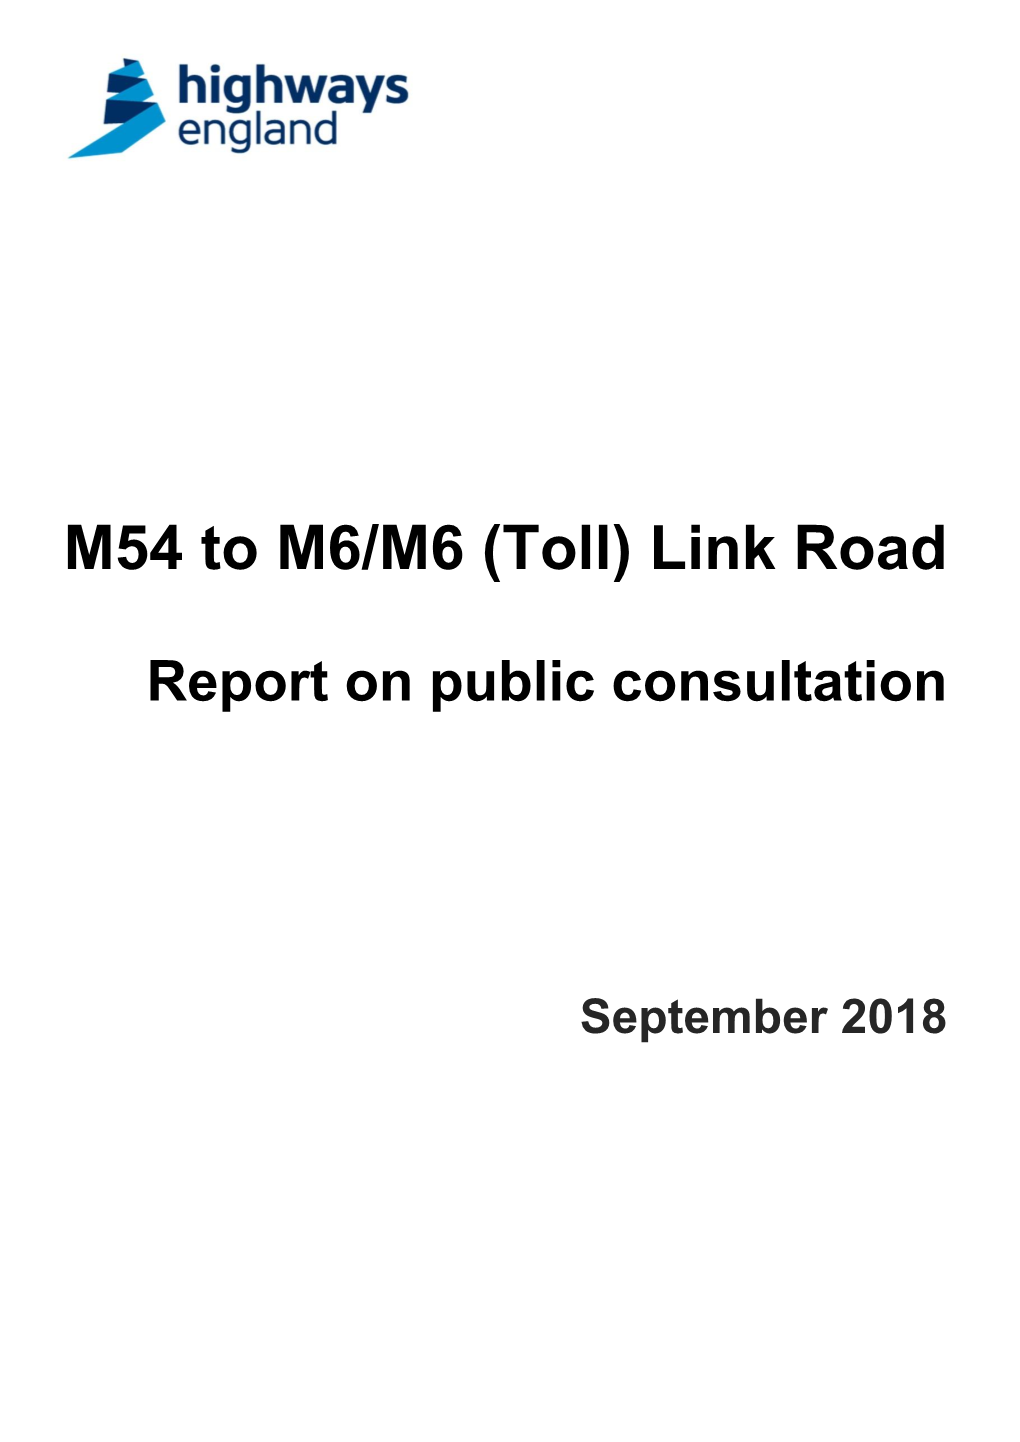 M54 to M6/M6 (Toll) Link Road